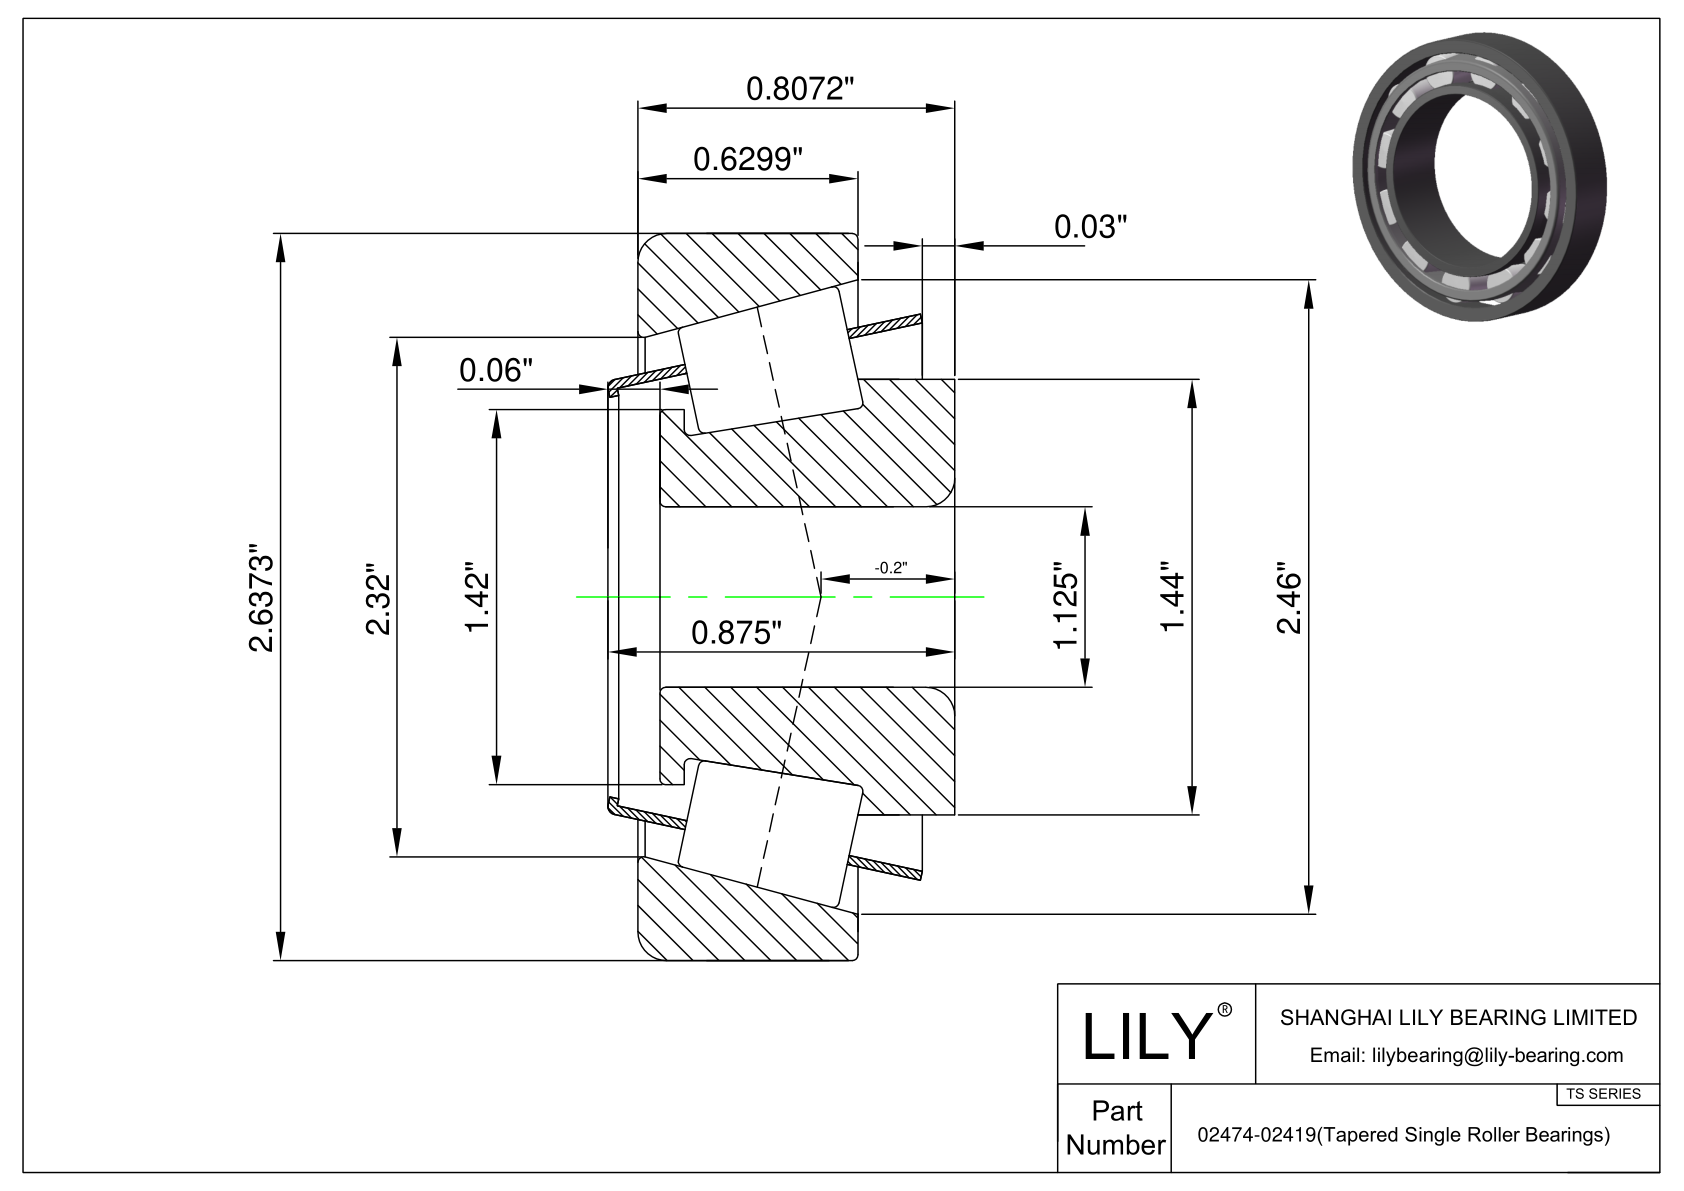 02474-02419 TS (Tapered Single Roller Bearings) (Imperial) cad drawing